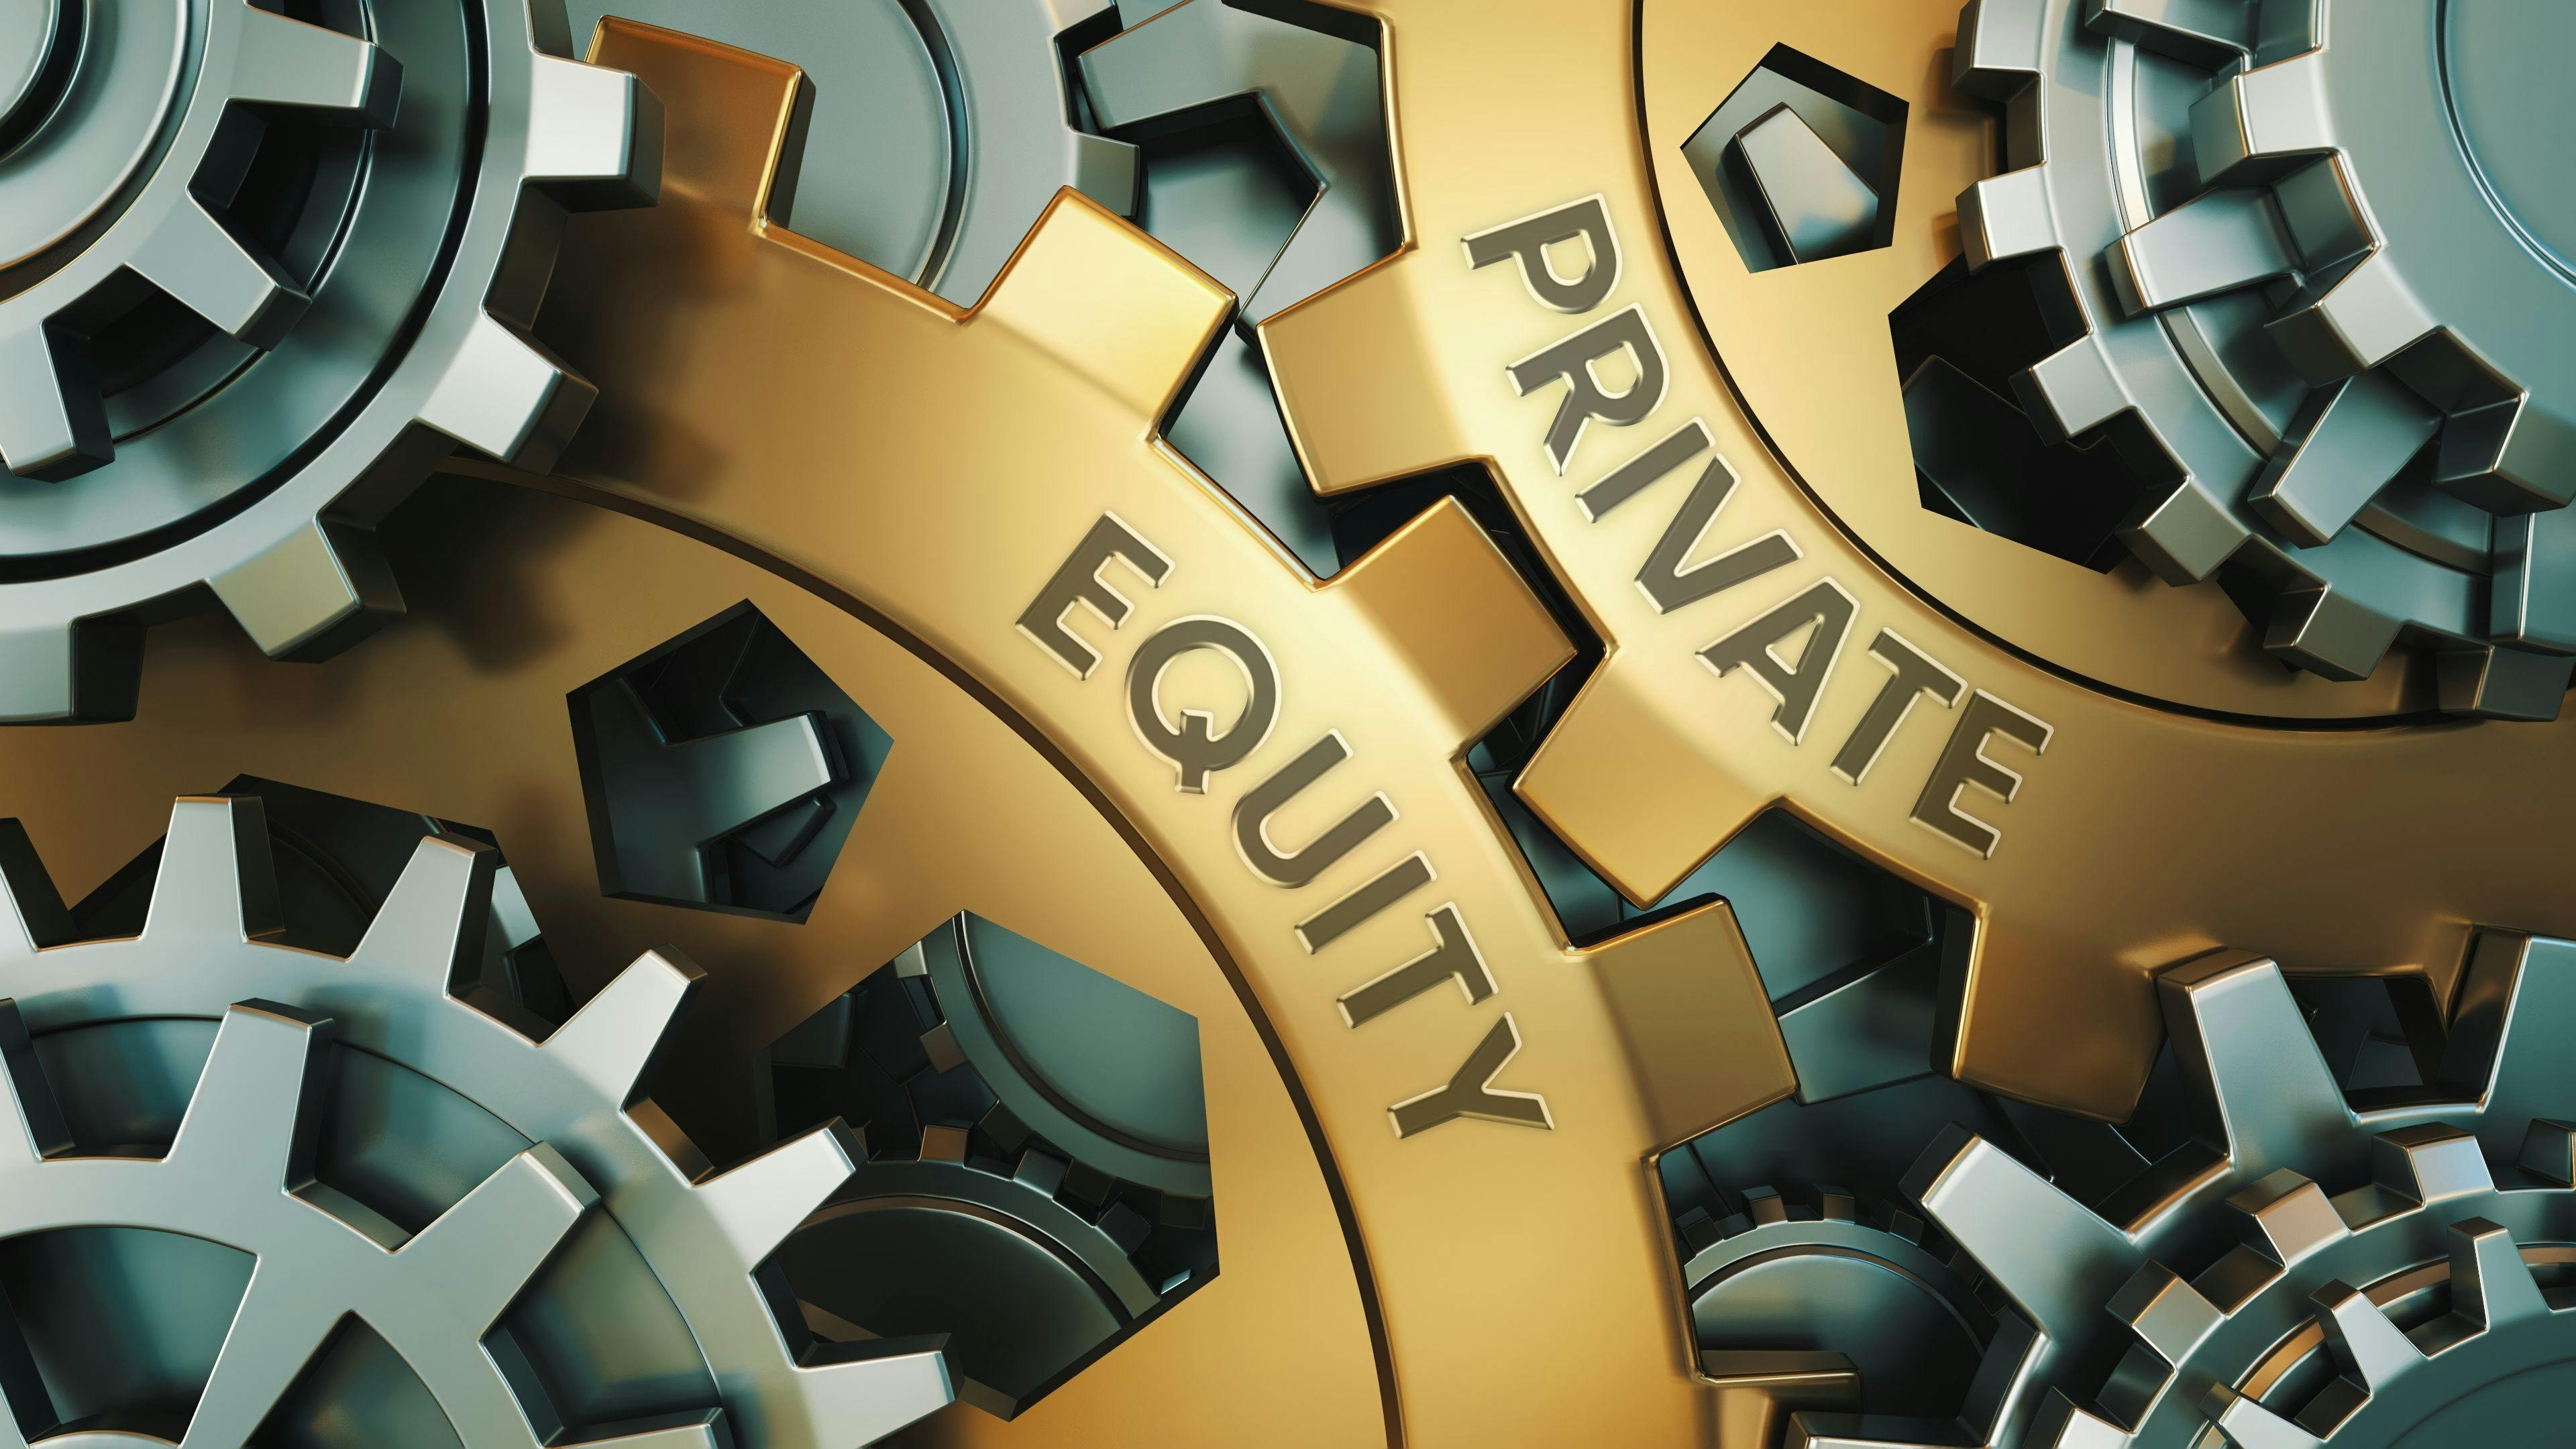 Private equity, Image Credit: ©Pavel, stock.adobe.com